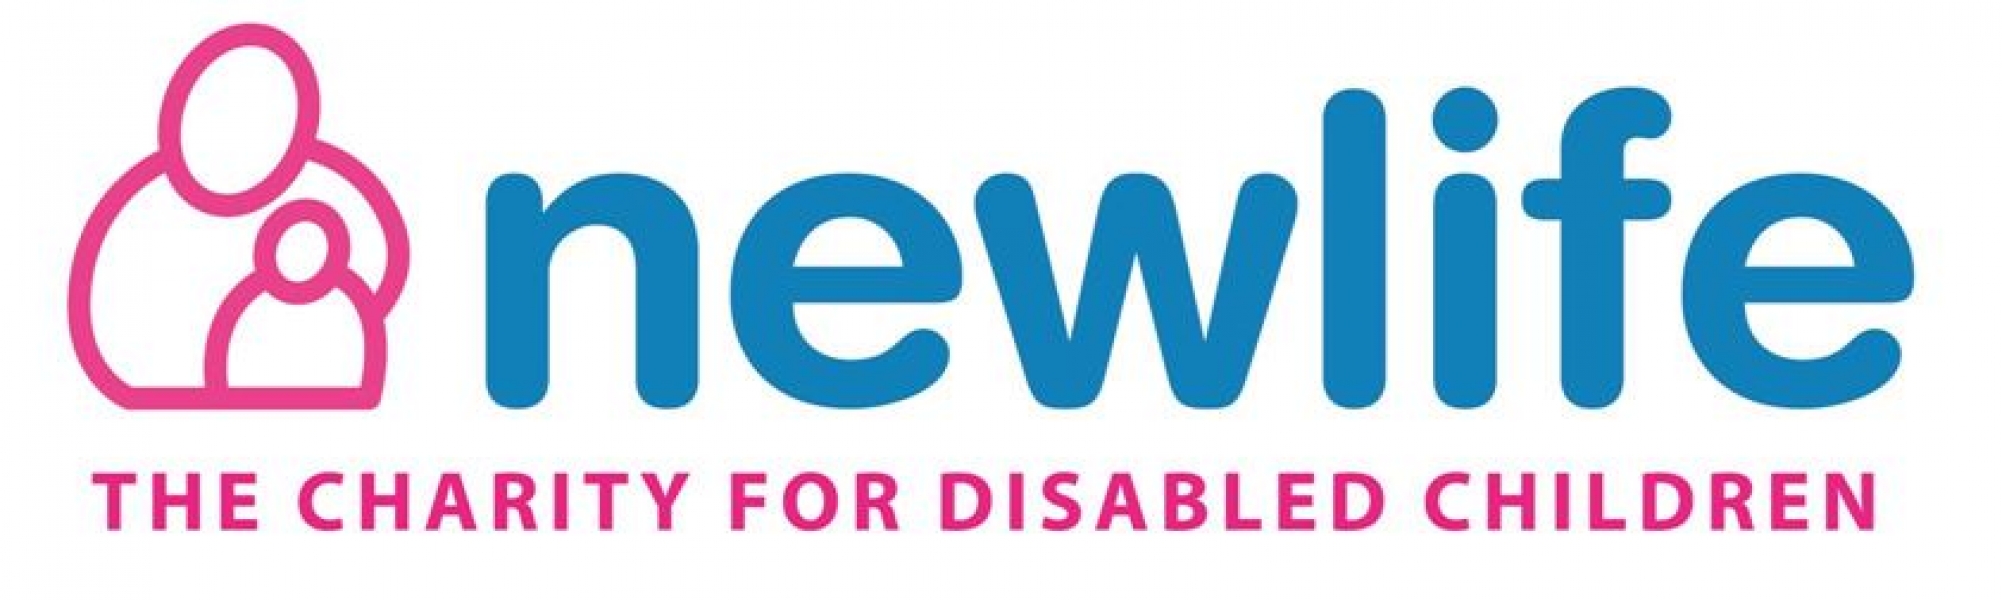 Newlife The Charity For Disabled Children eCards